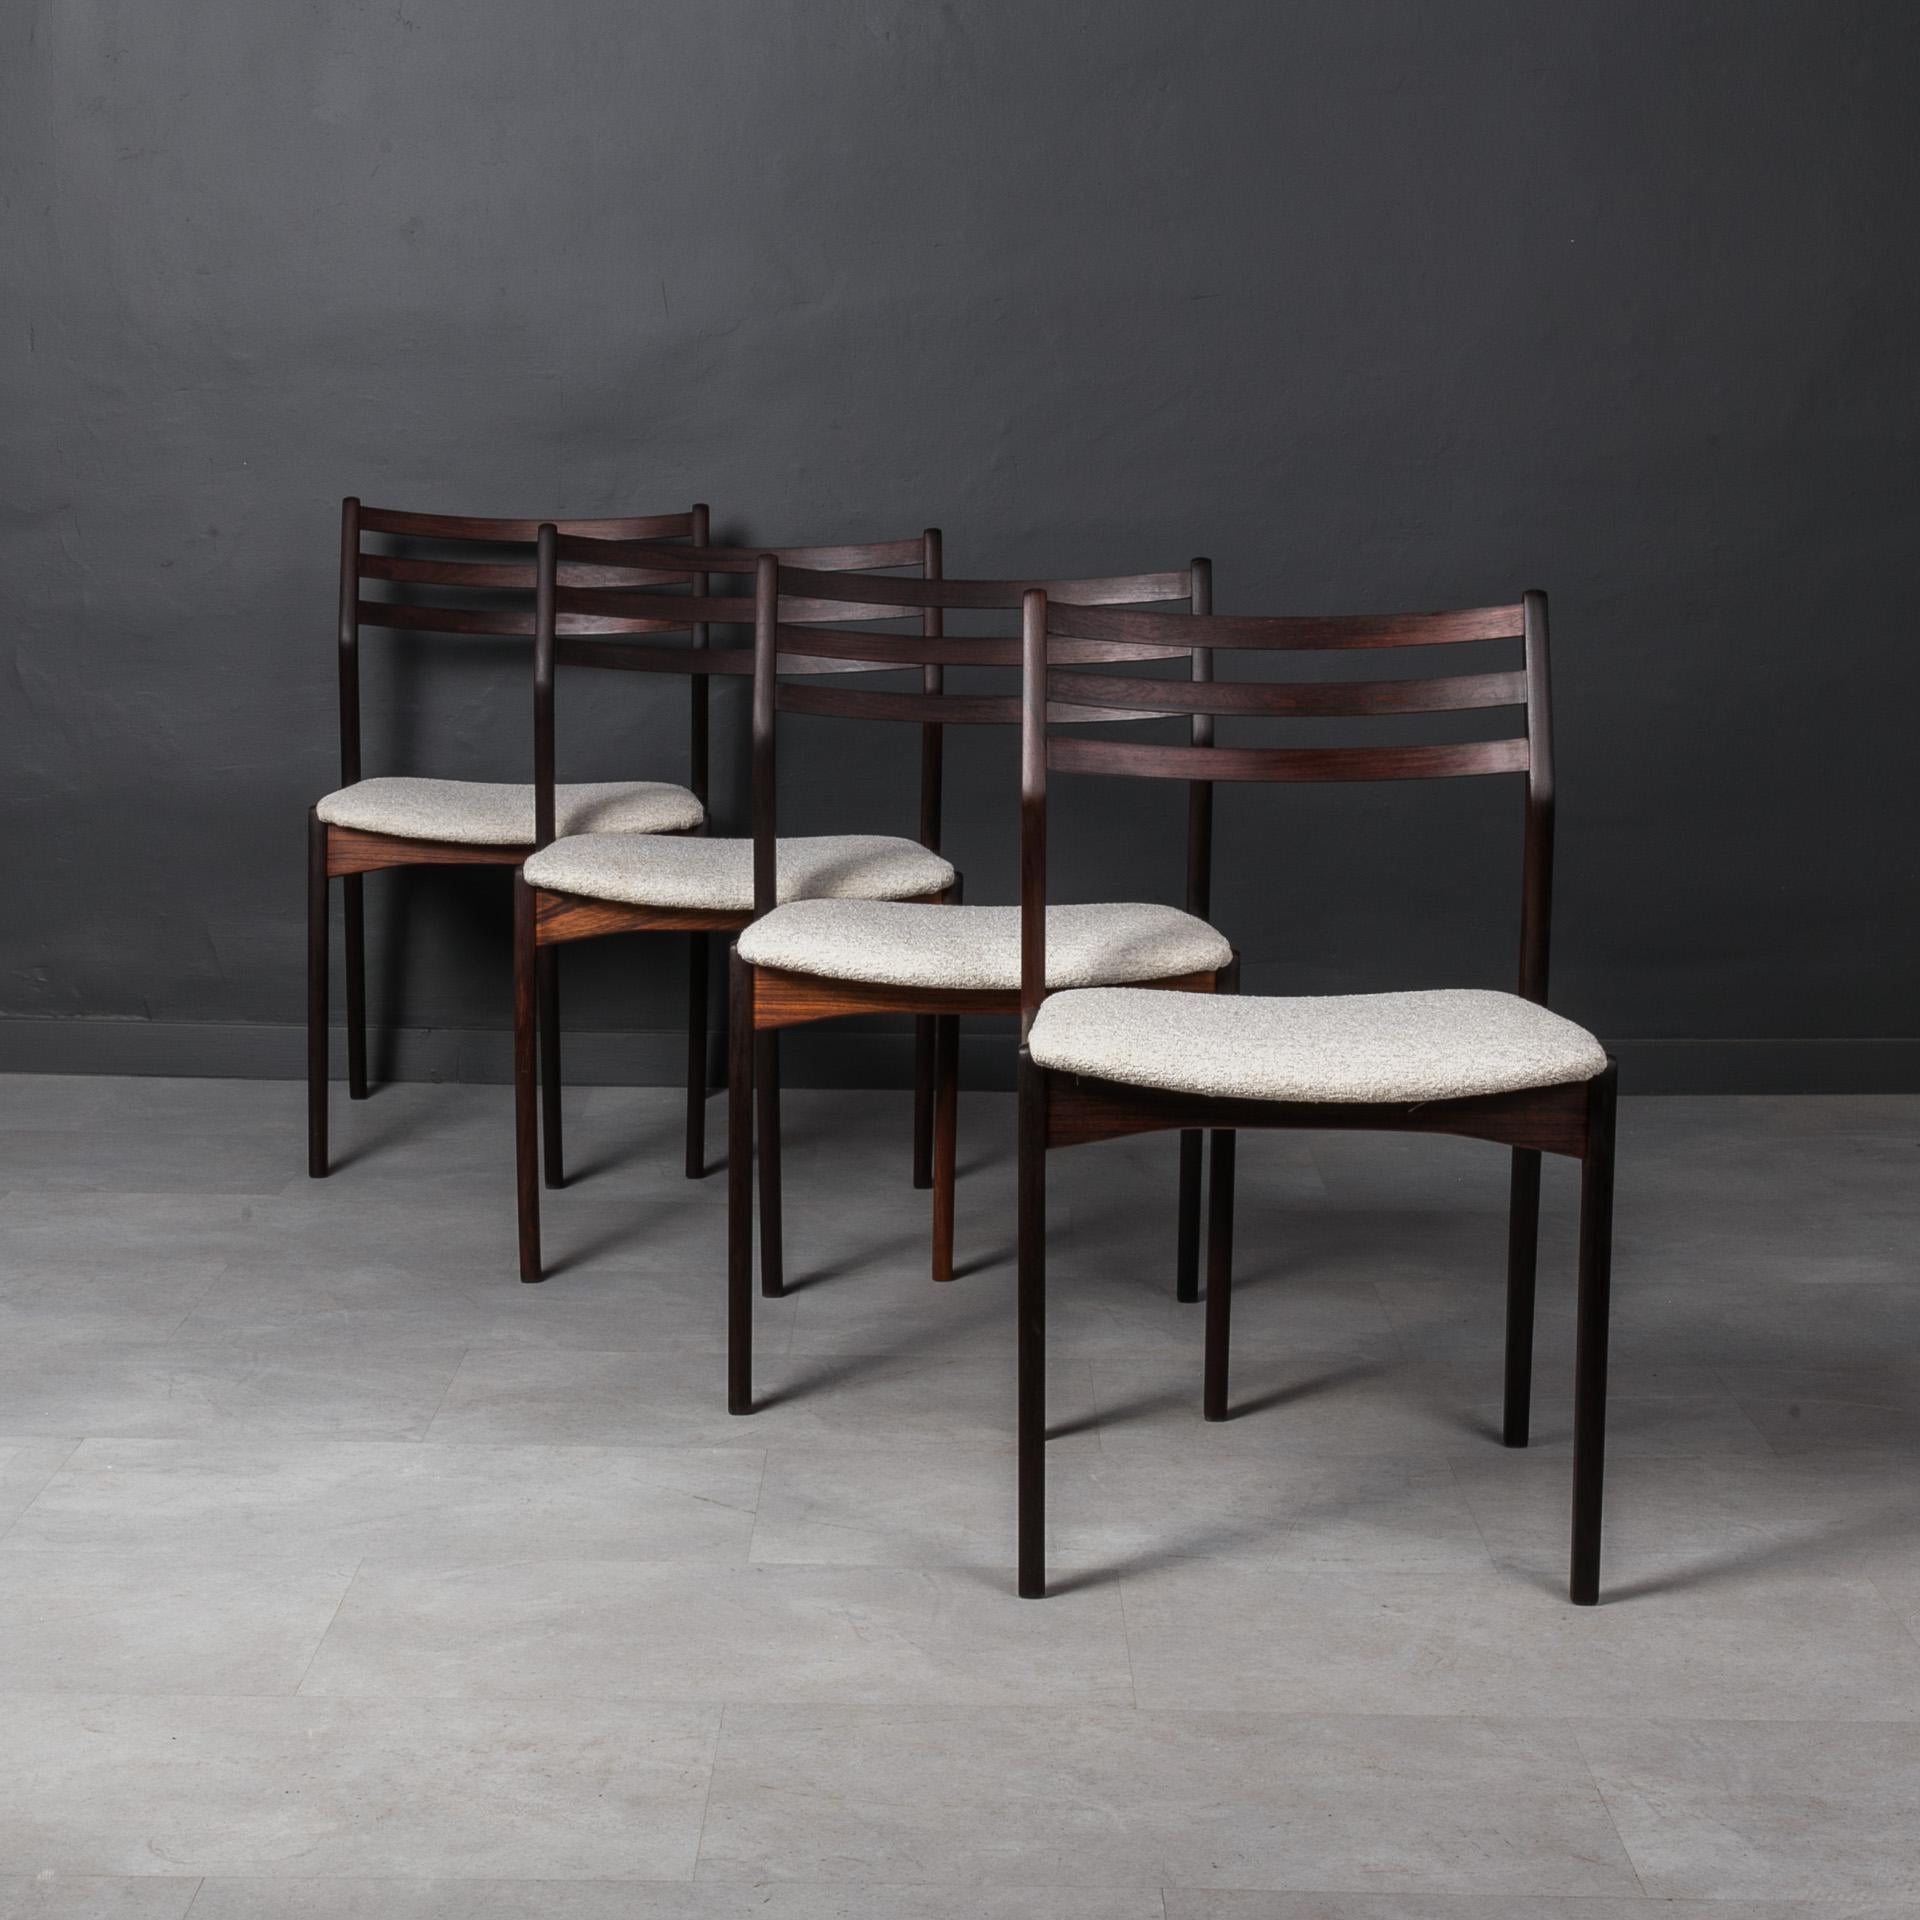 Danish Set of 4 Dining Chairs by Vestervig Eriksen, 1960s, Fully Renovated